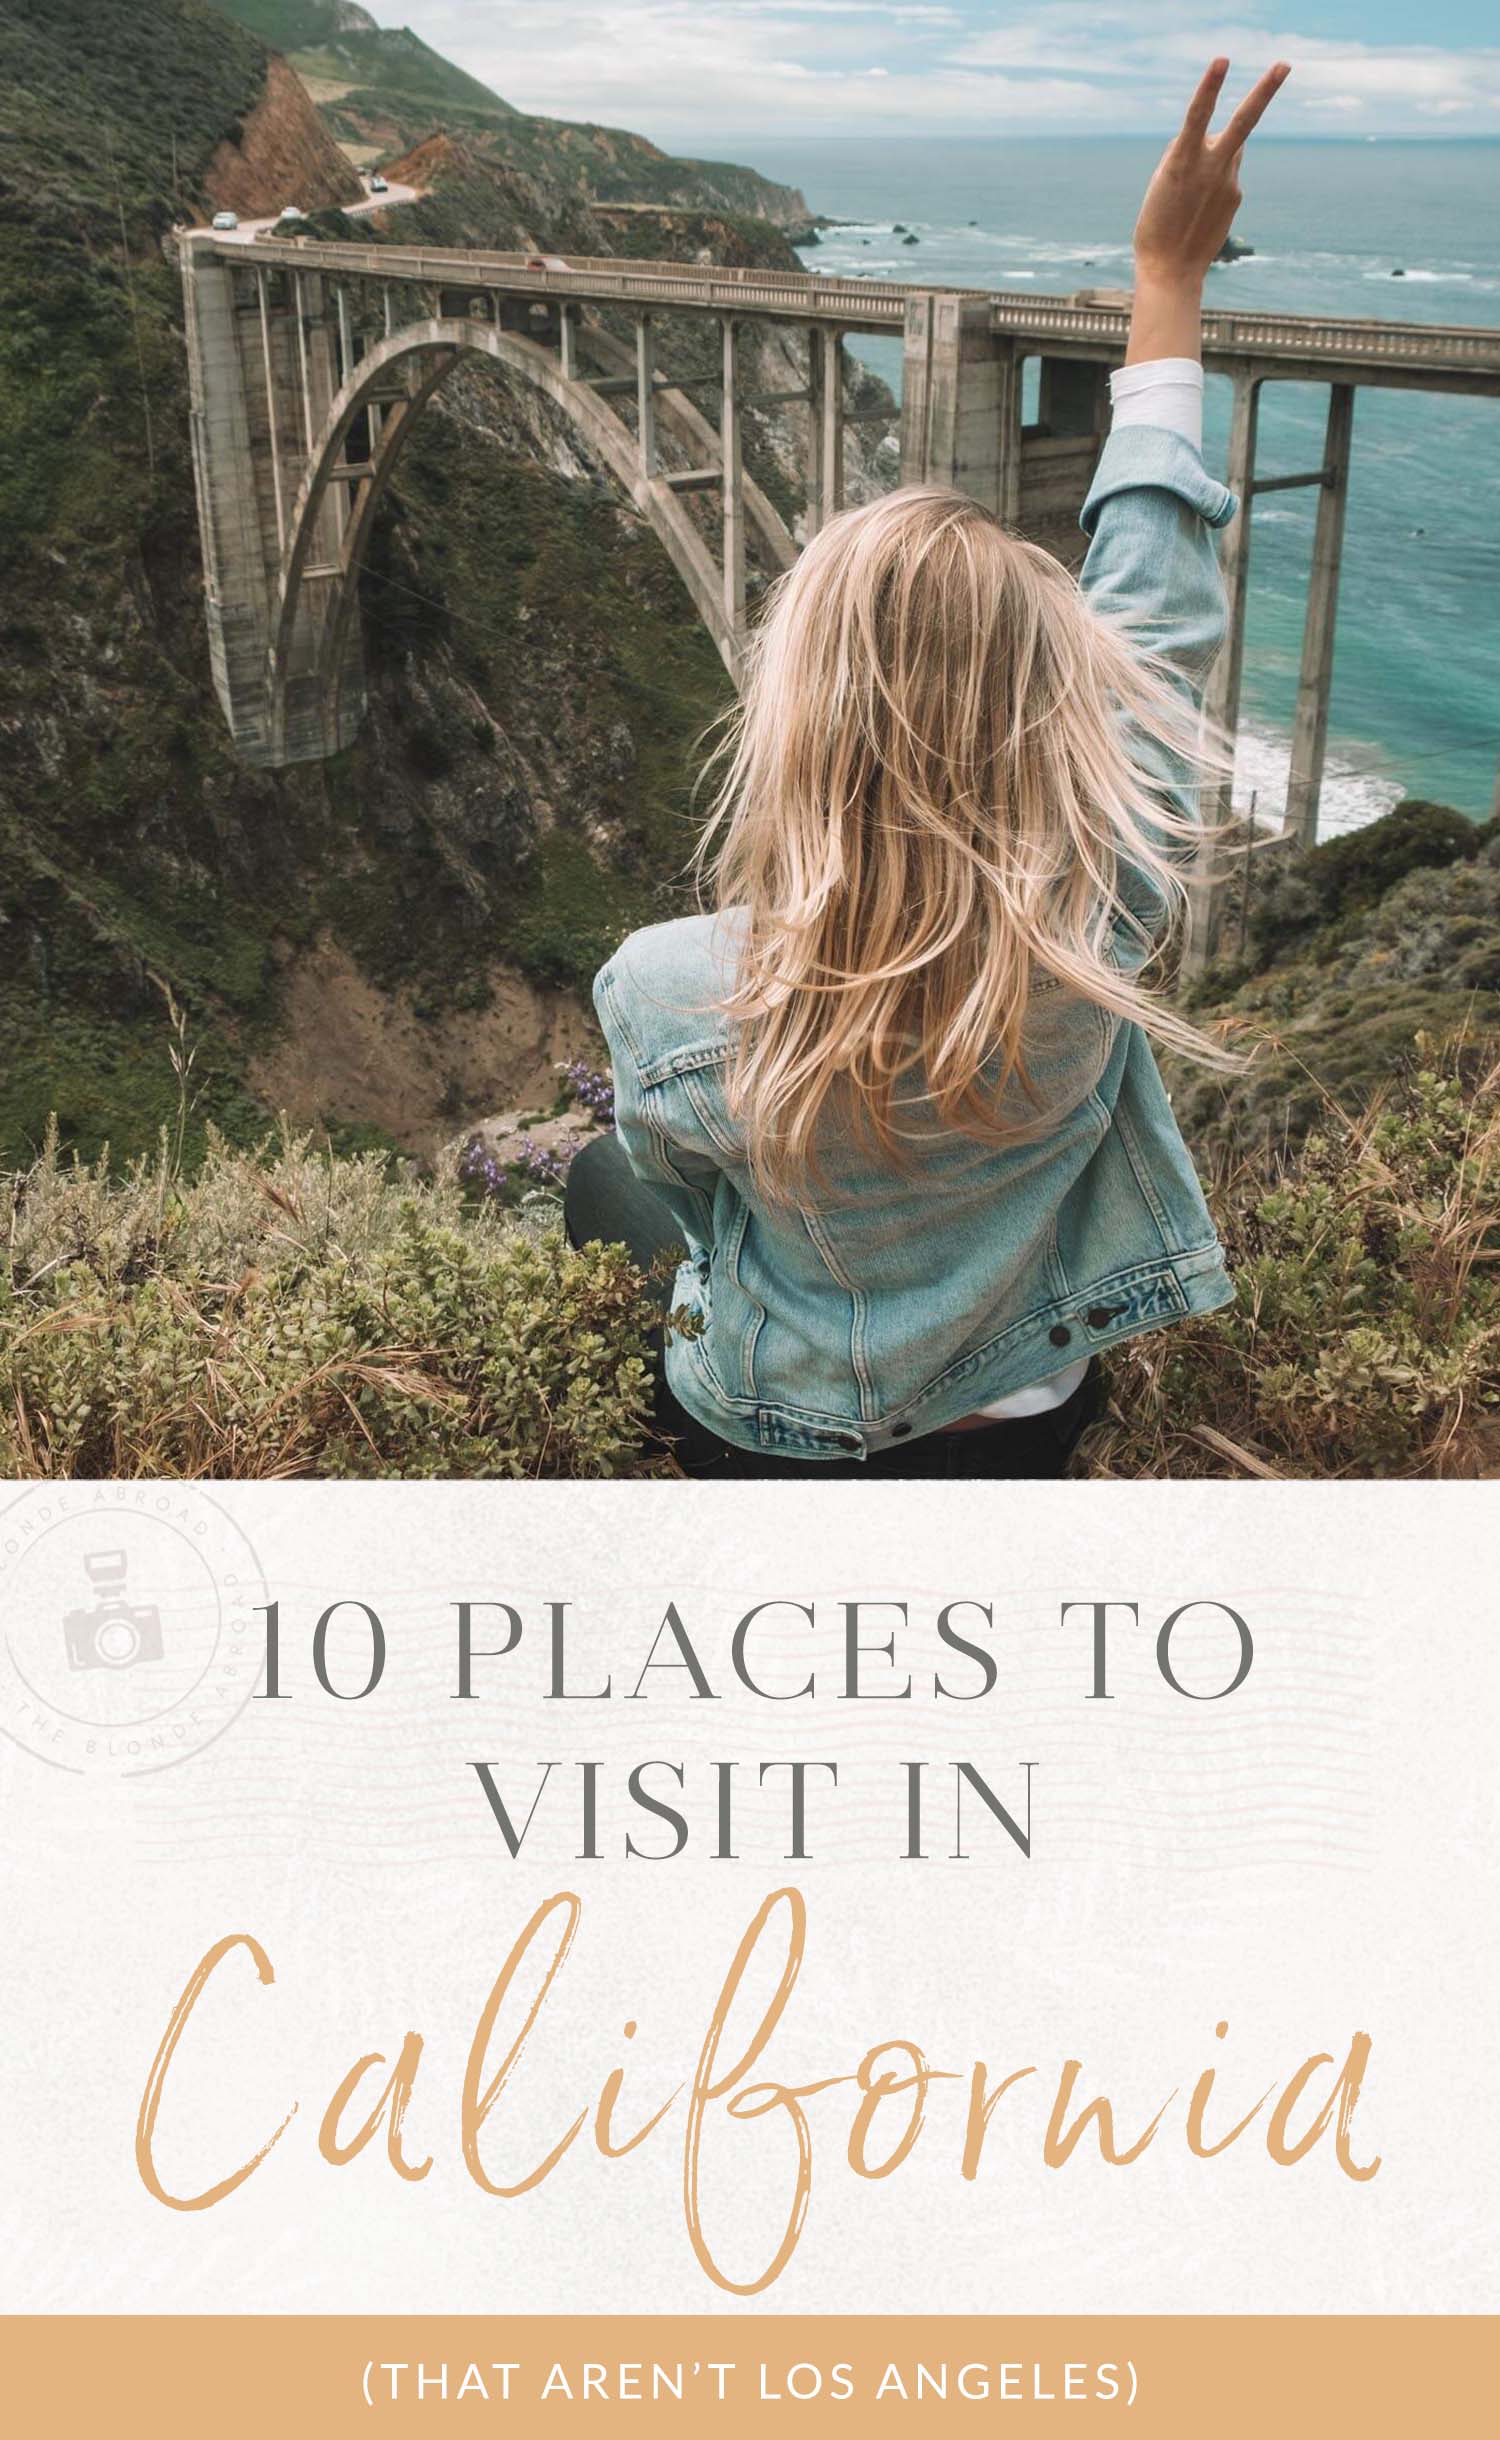 10 Places to Visit in California